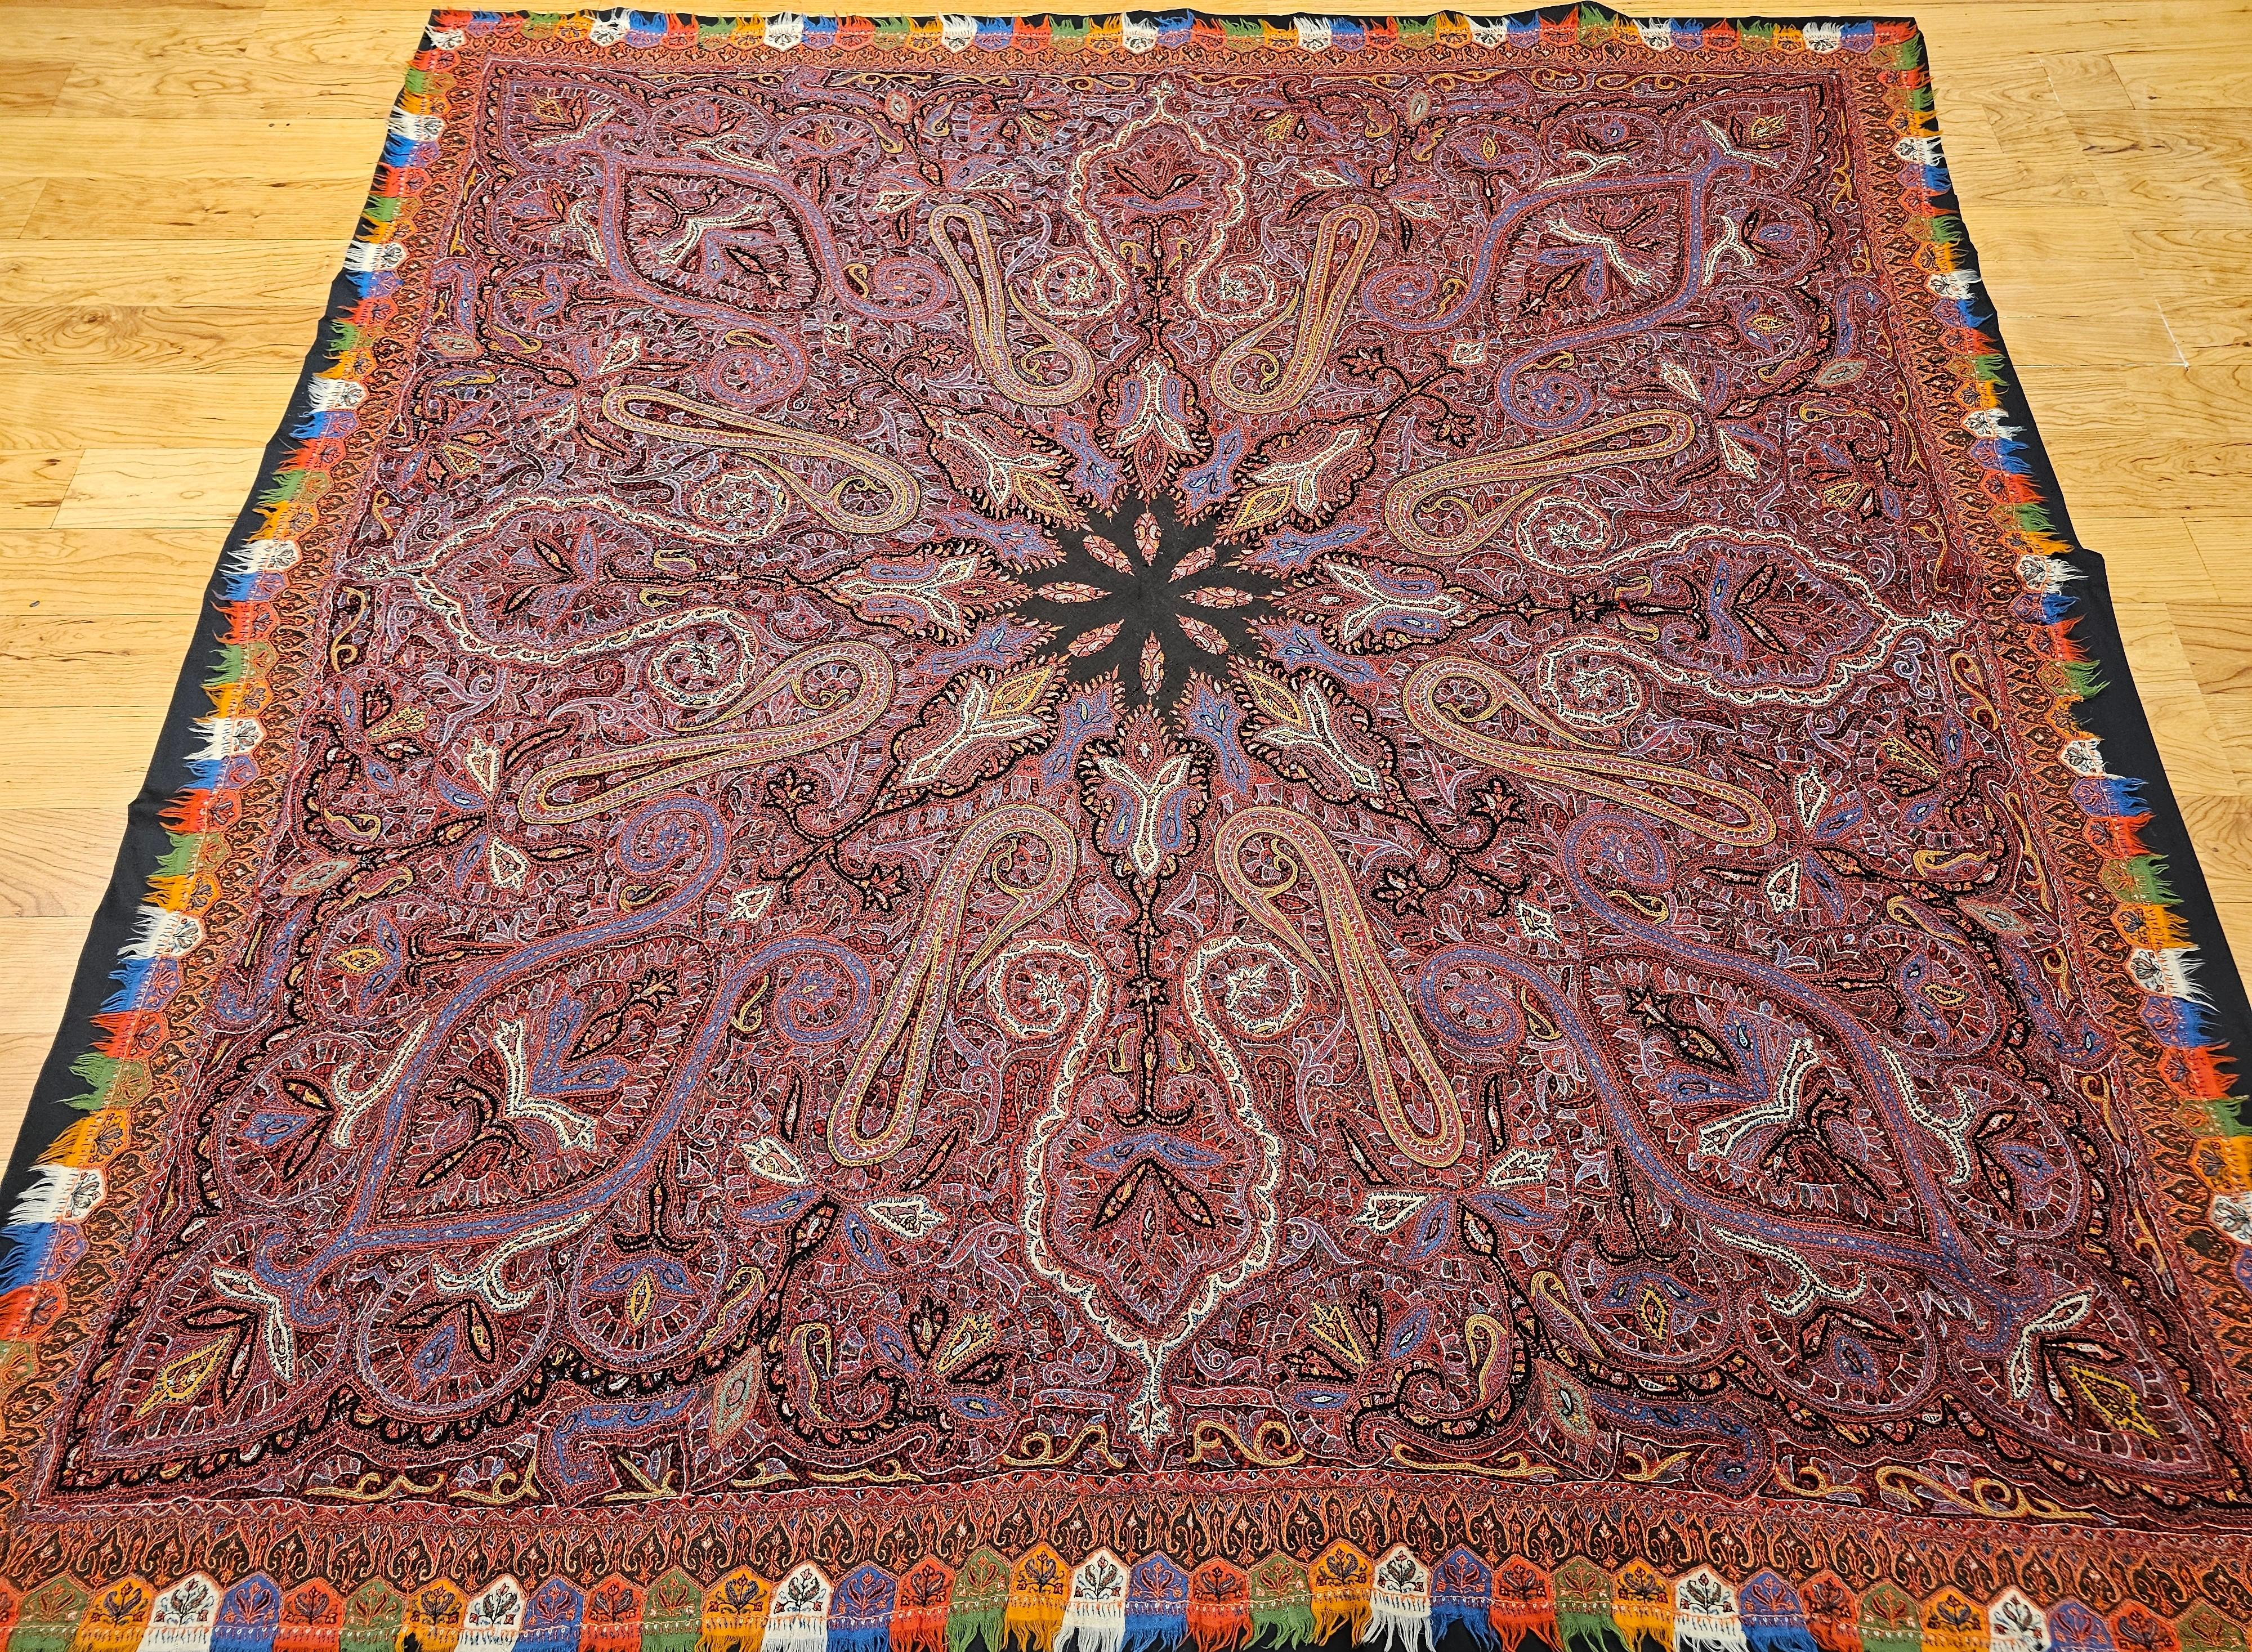 Indian 19th Century Hand Embroidered “Kashmiri Pieced Shawl” in Brick Red, Black, Blue For Sale